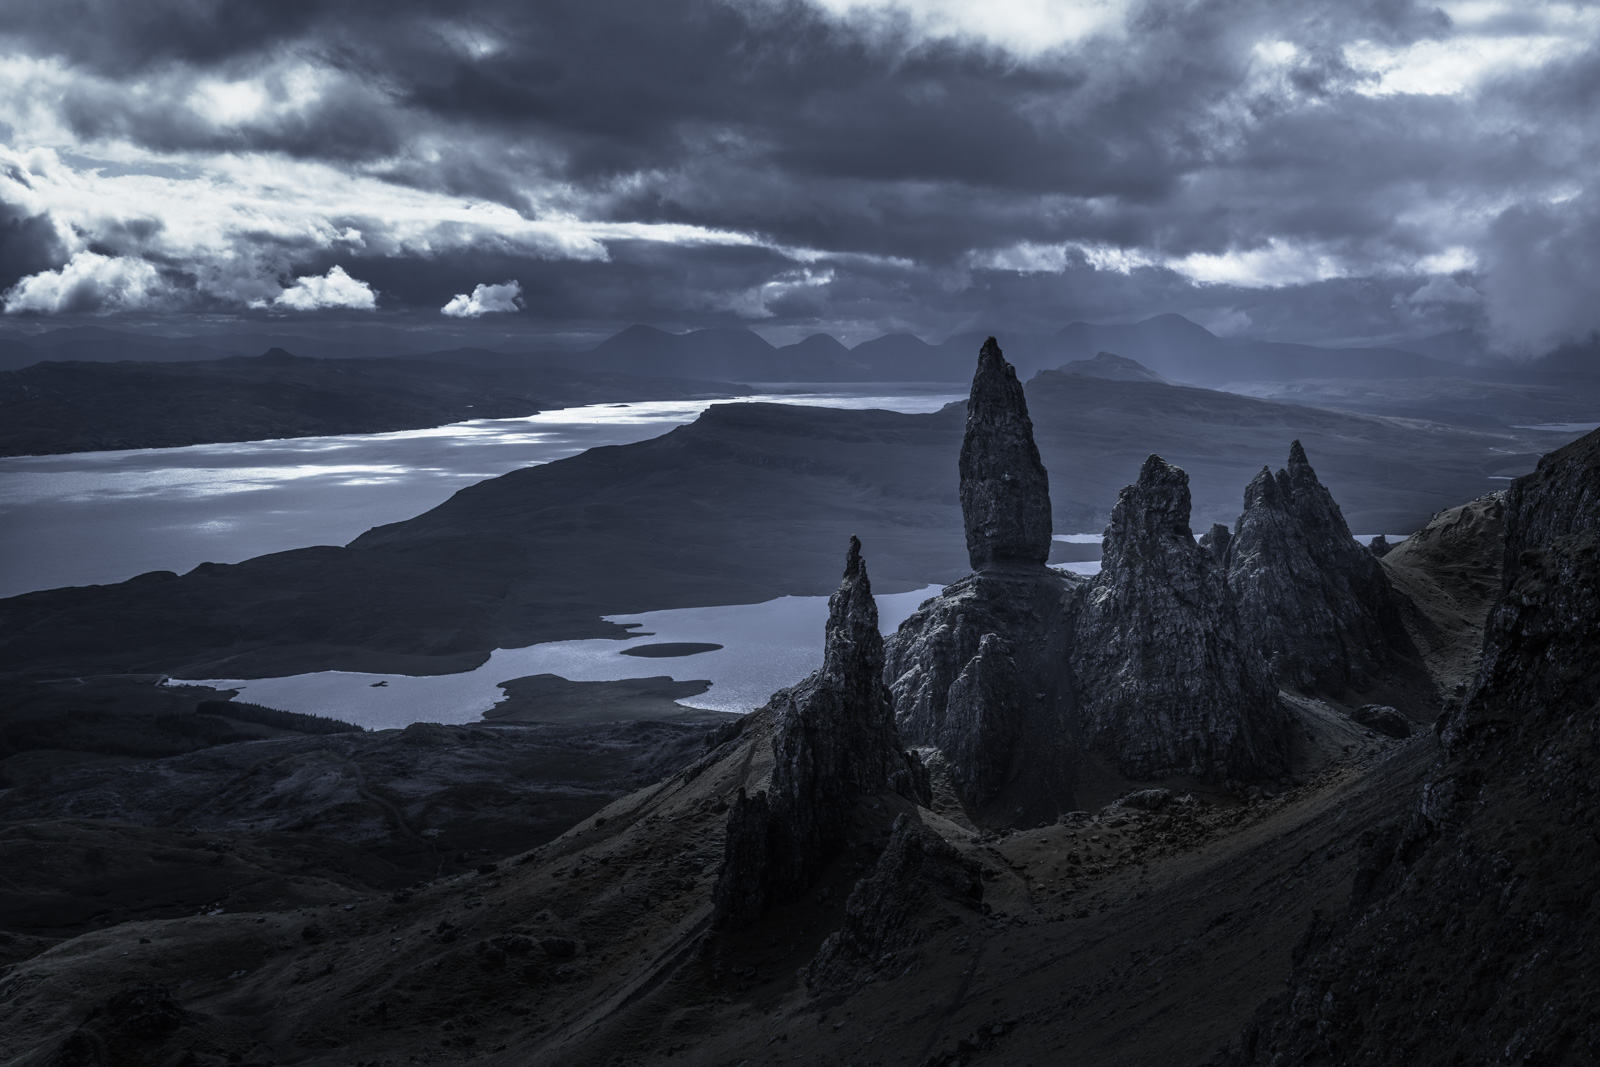  "The Old Man of Storr", Scotland 